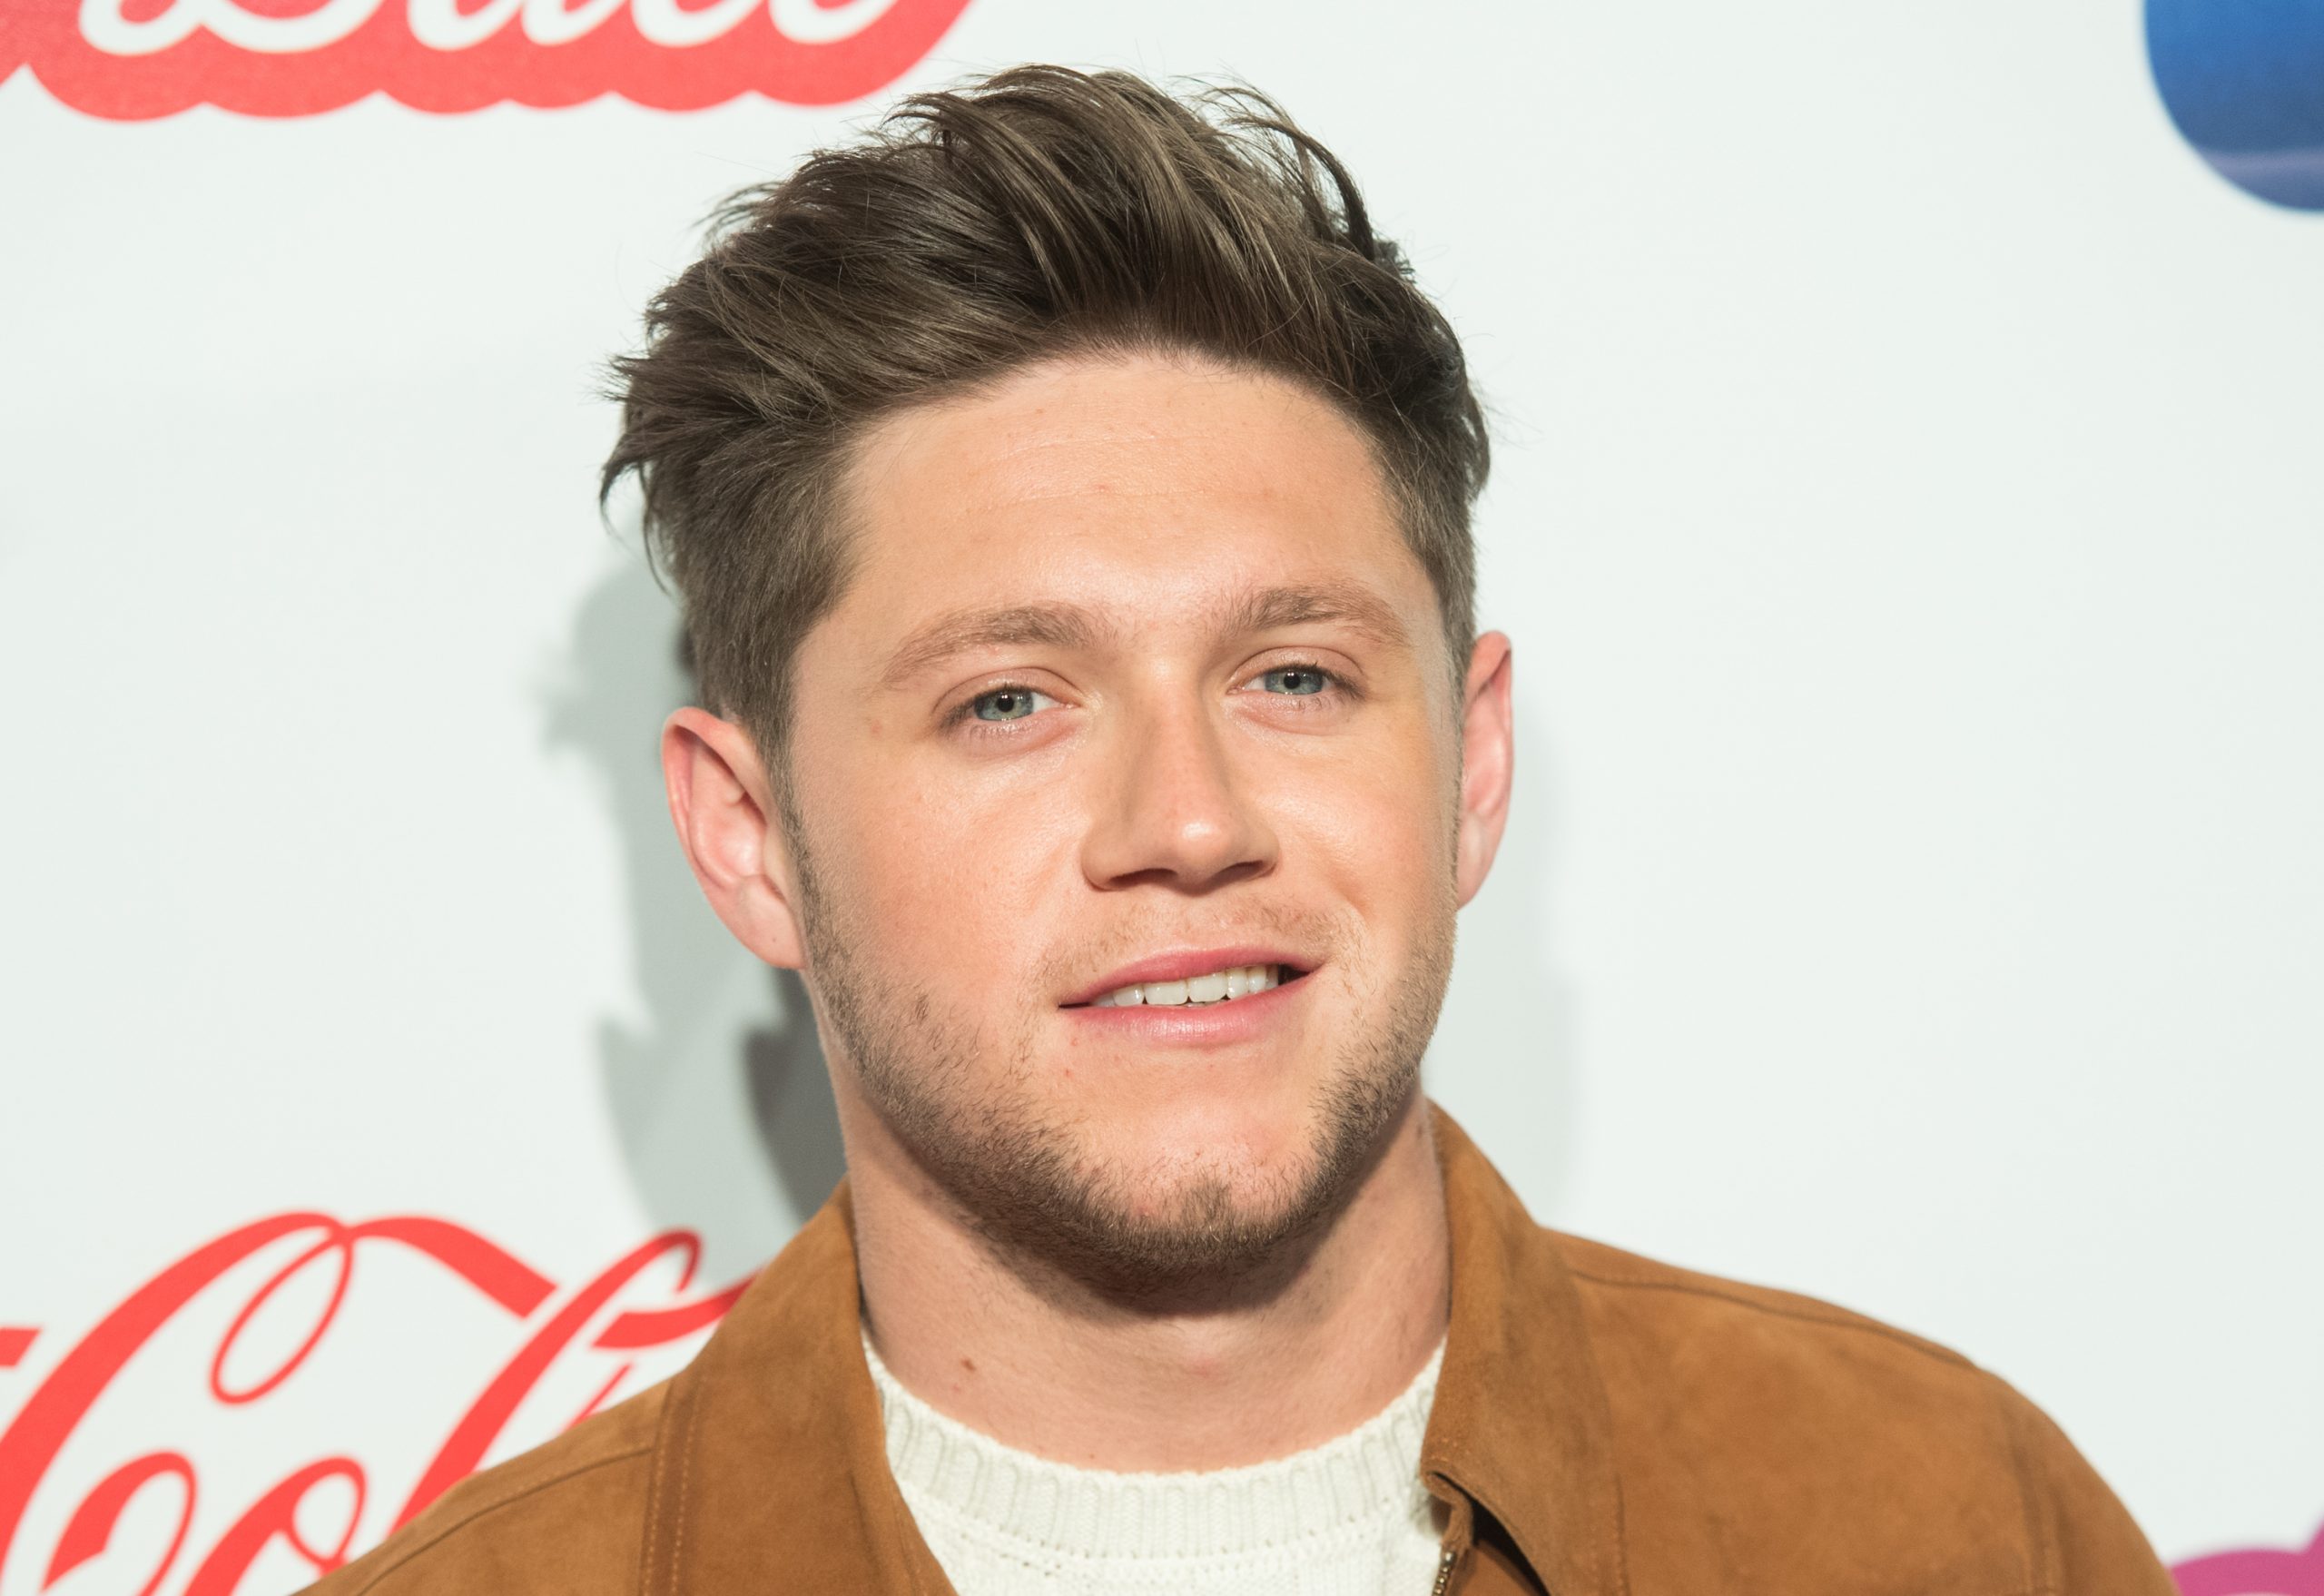 Niall Horan Net Worth And Complete Bio